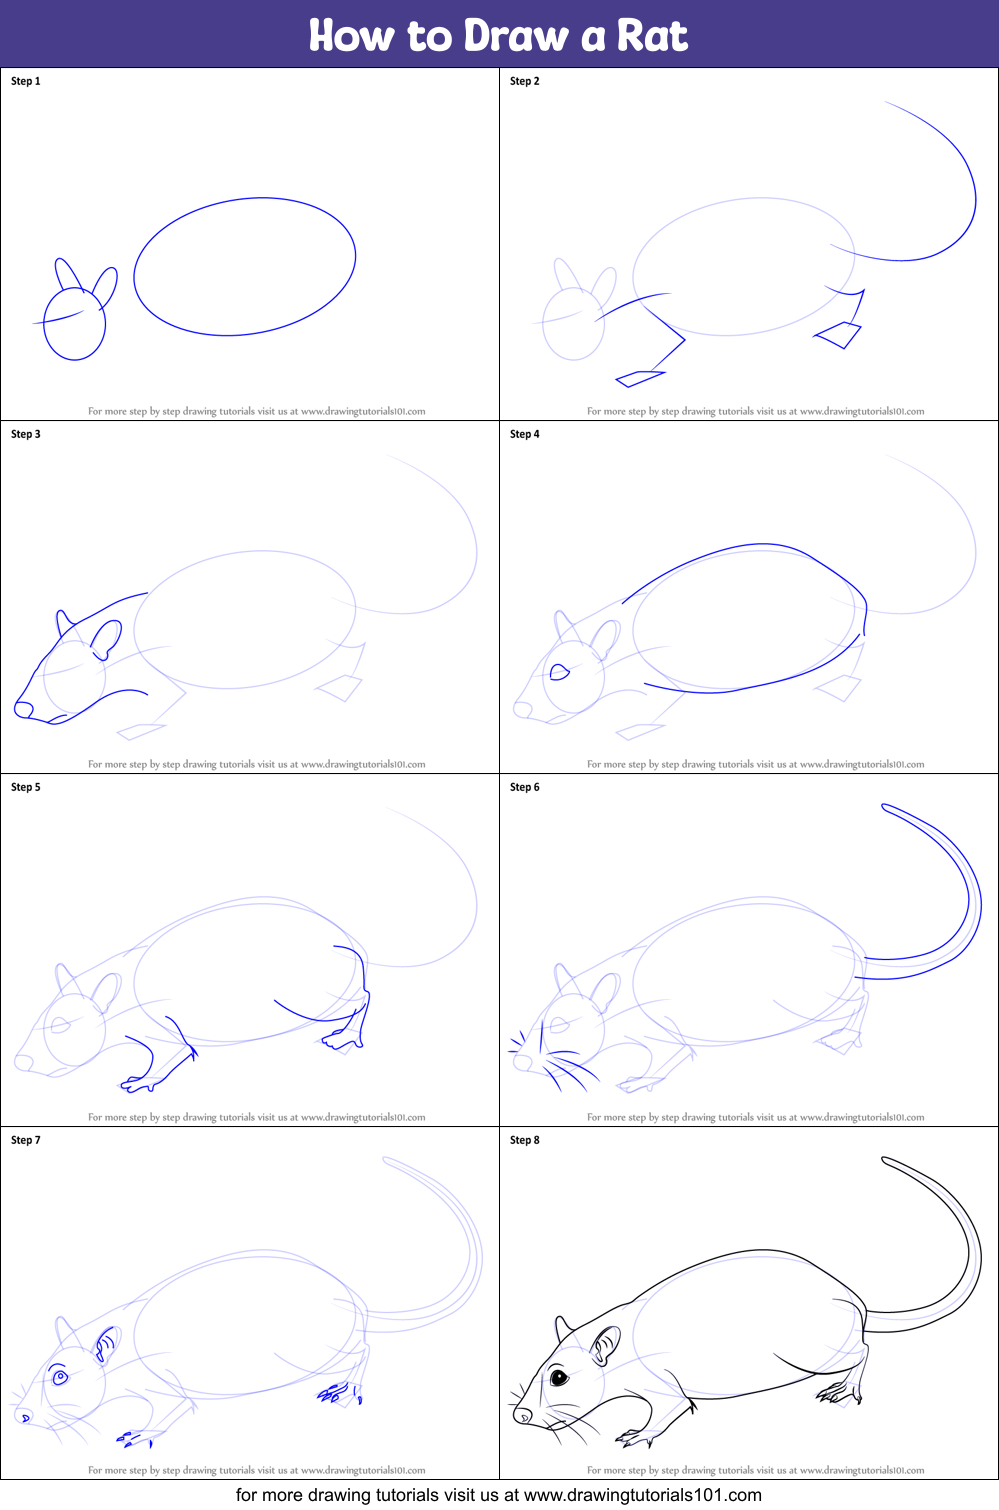 How to Draw a Rat printable step by step drawing sheet